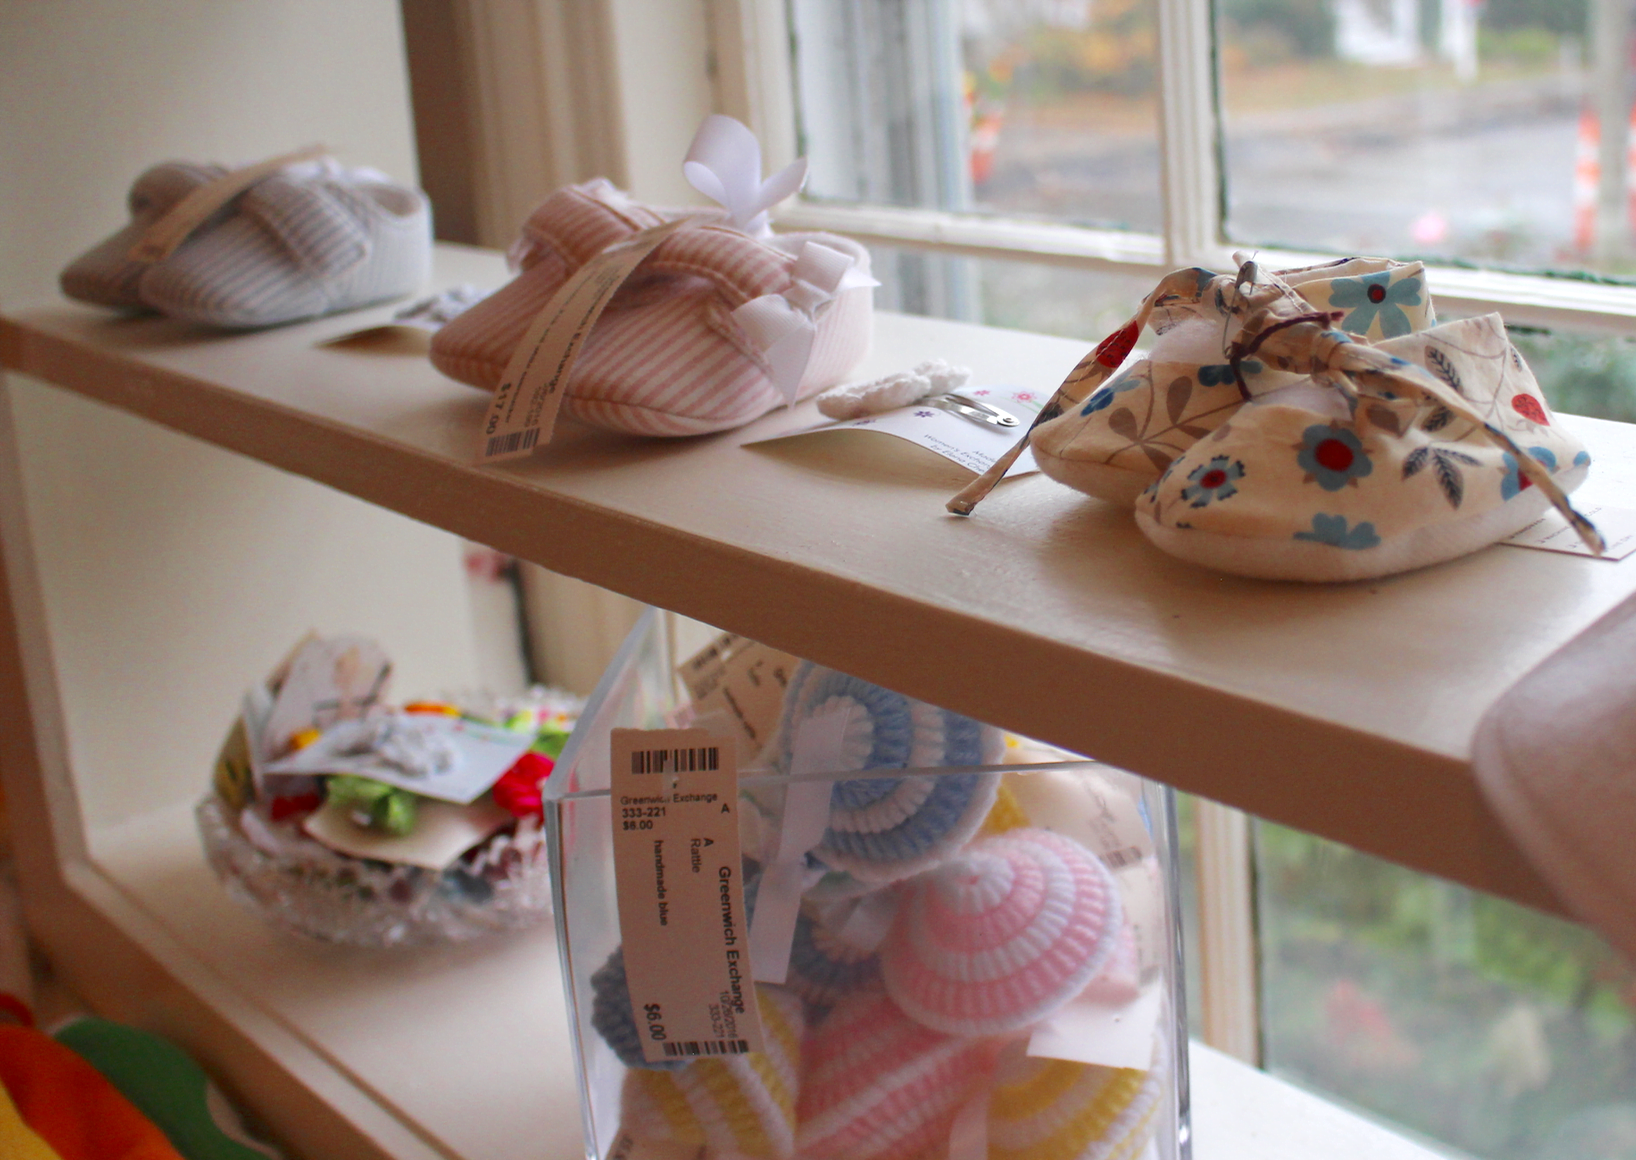 Hand made baby gifts at The Greenwich Exchange for Women's Work. Photo: Leslie Yager